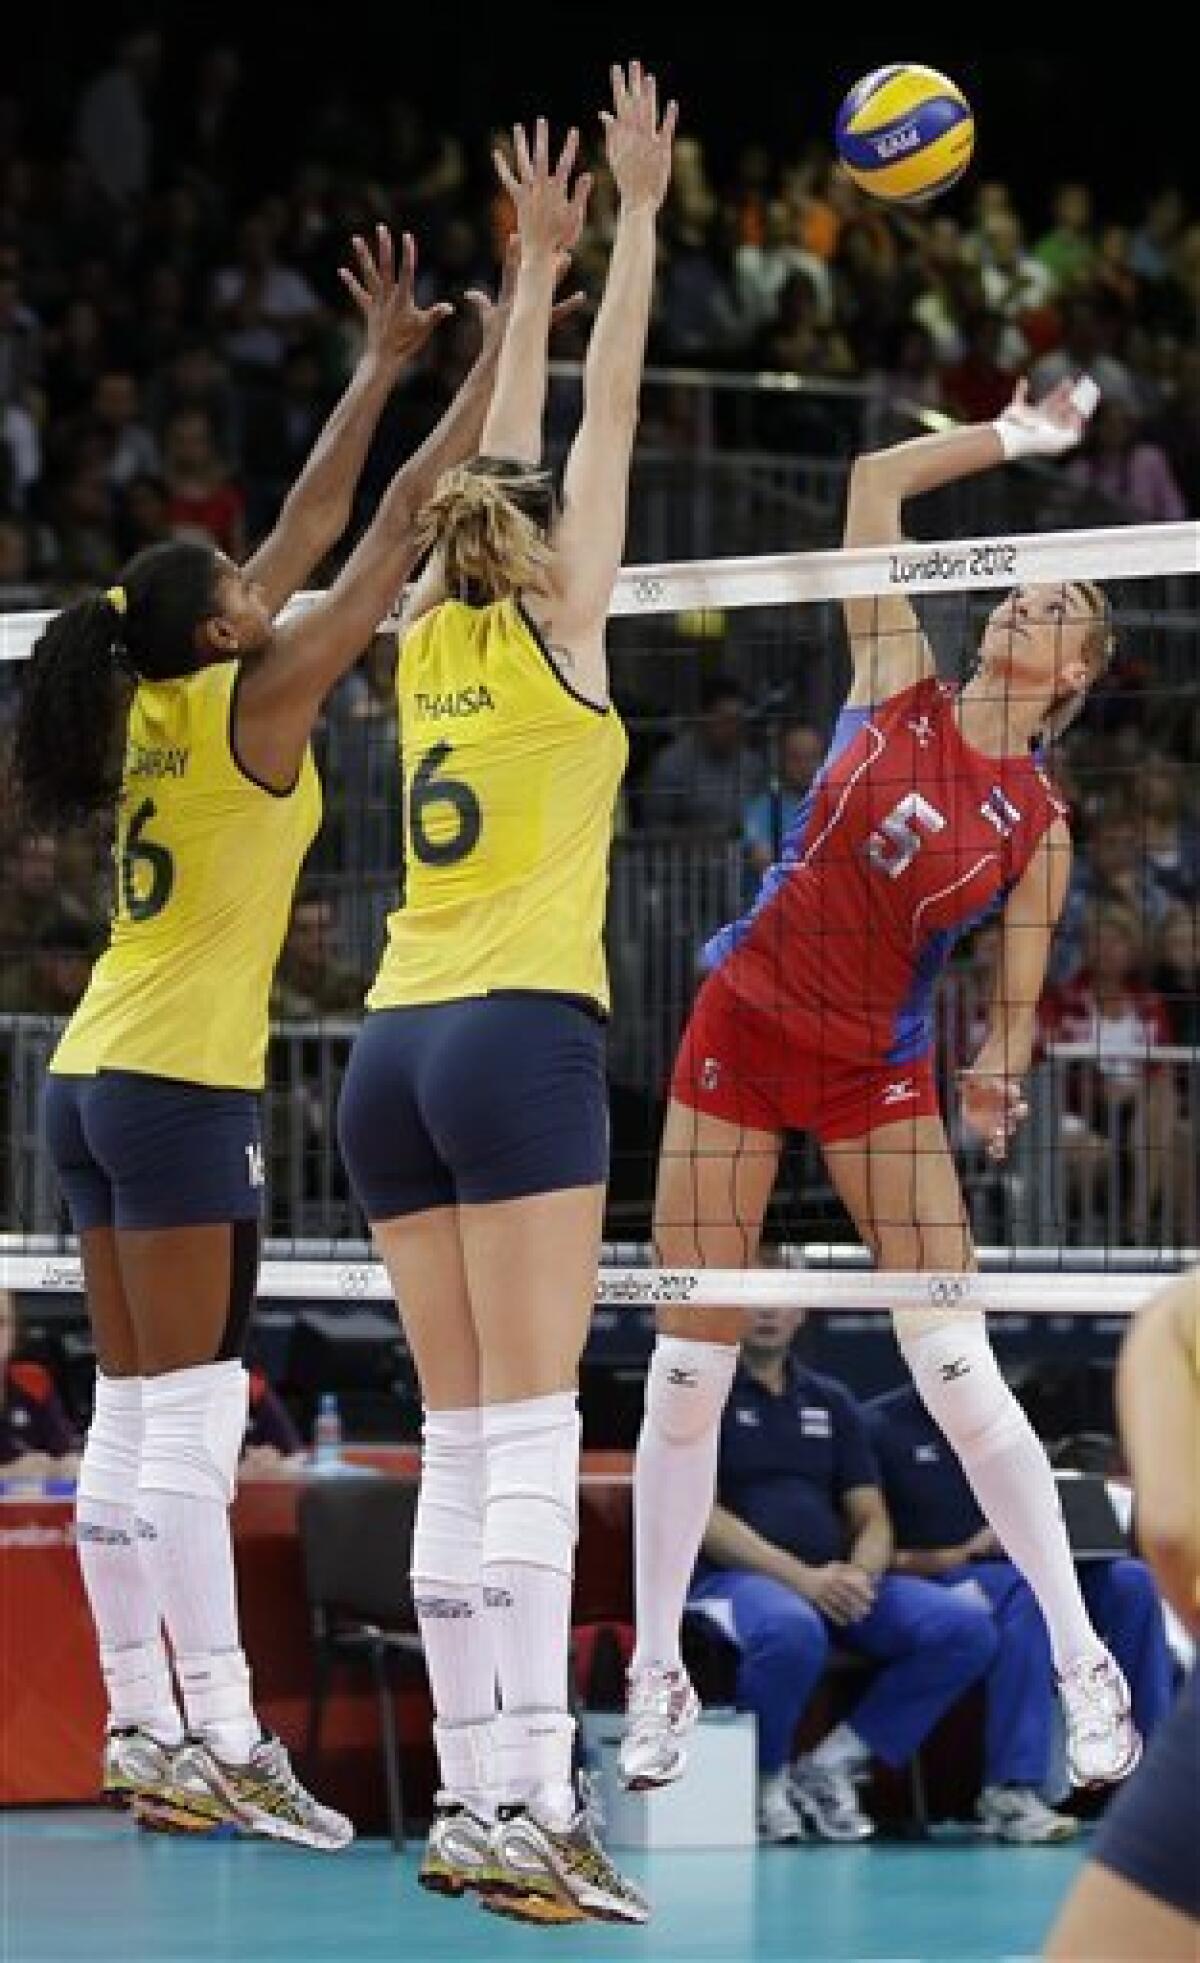 Russia's Liubova Shashkova (5) spikes the ball towards Brazil's Fernanda Rodrigues (16) and Thaisa Menezes (6) during a women's volleyball quarterfinal match at the 2012 Summer Olympics Tuesday, Aug. 7, 2012, in London. (AP Photo/Chris O'Meara)